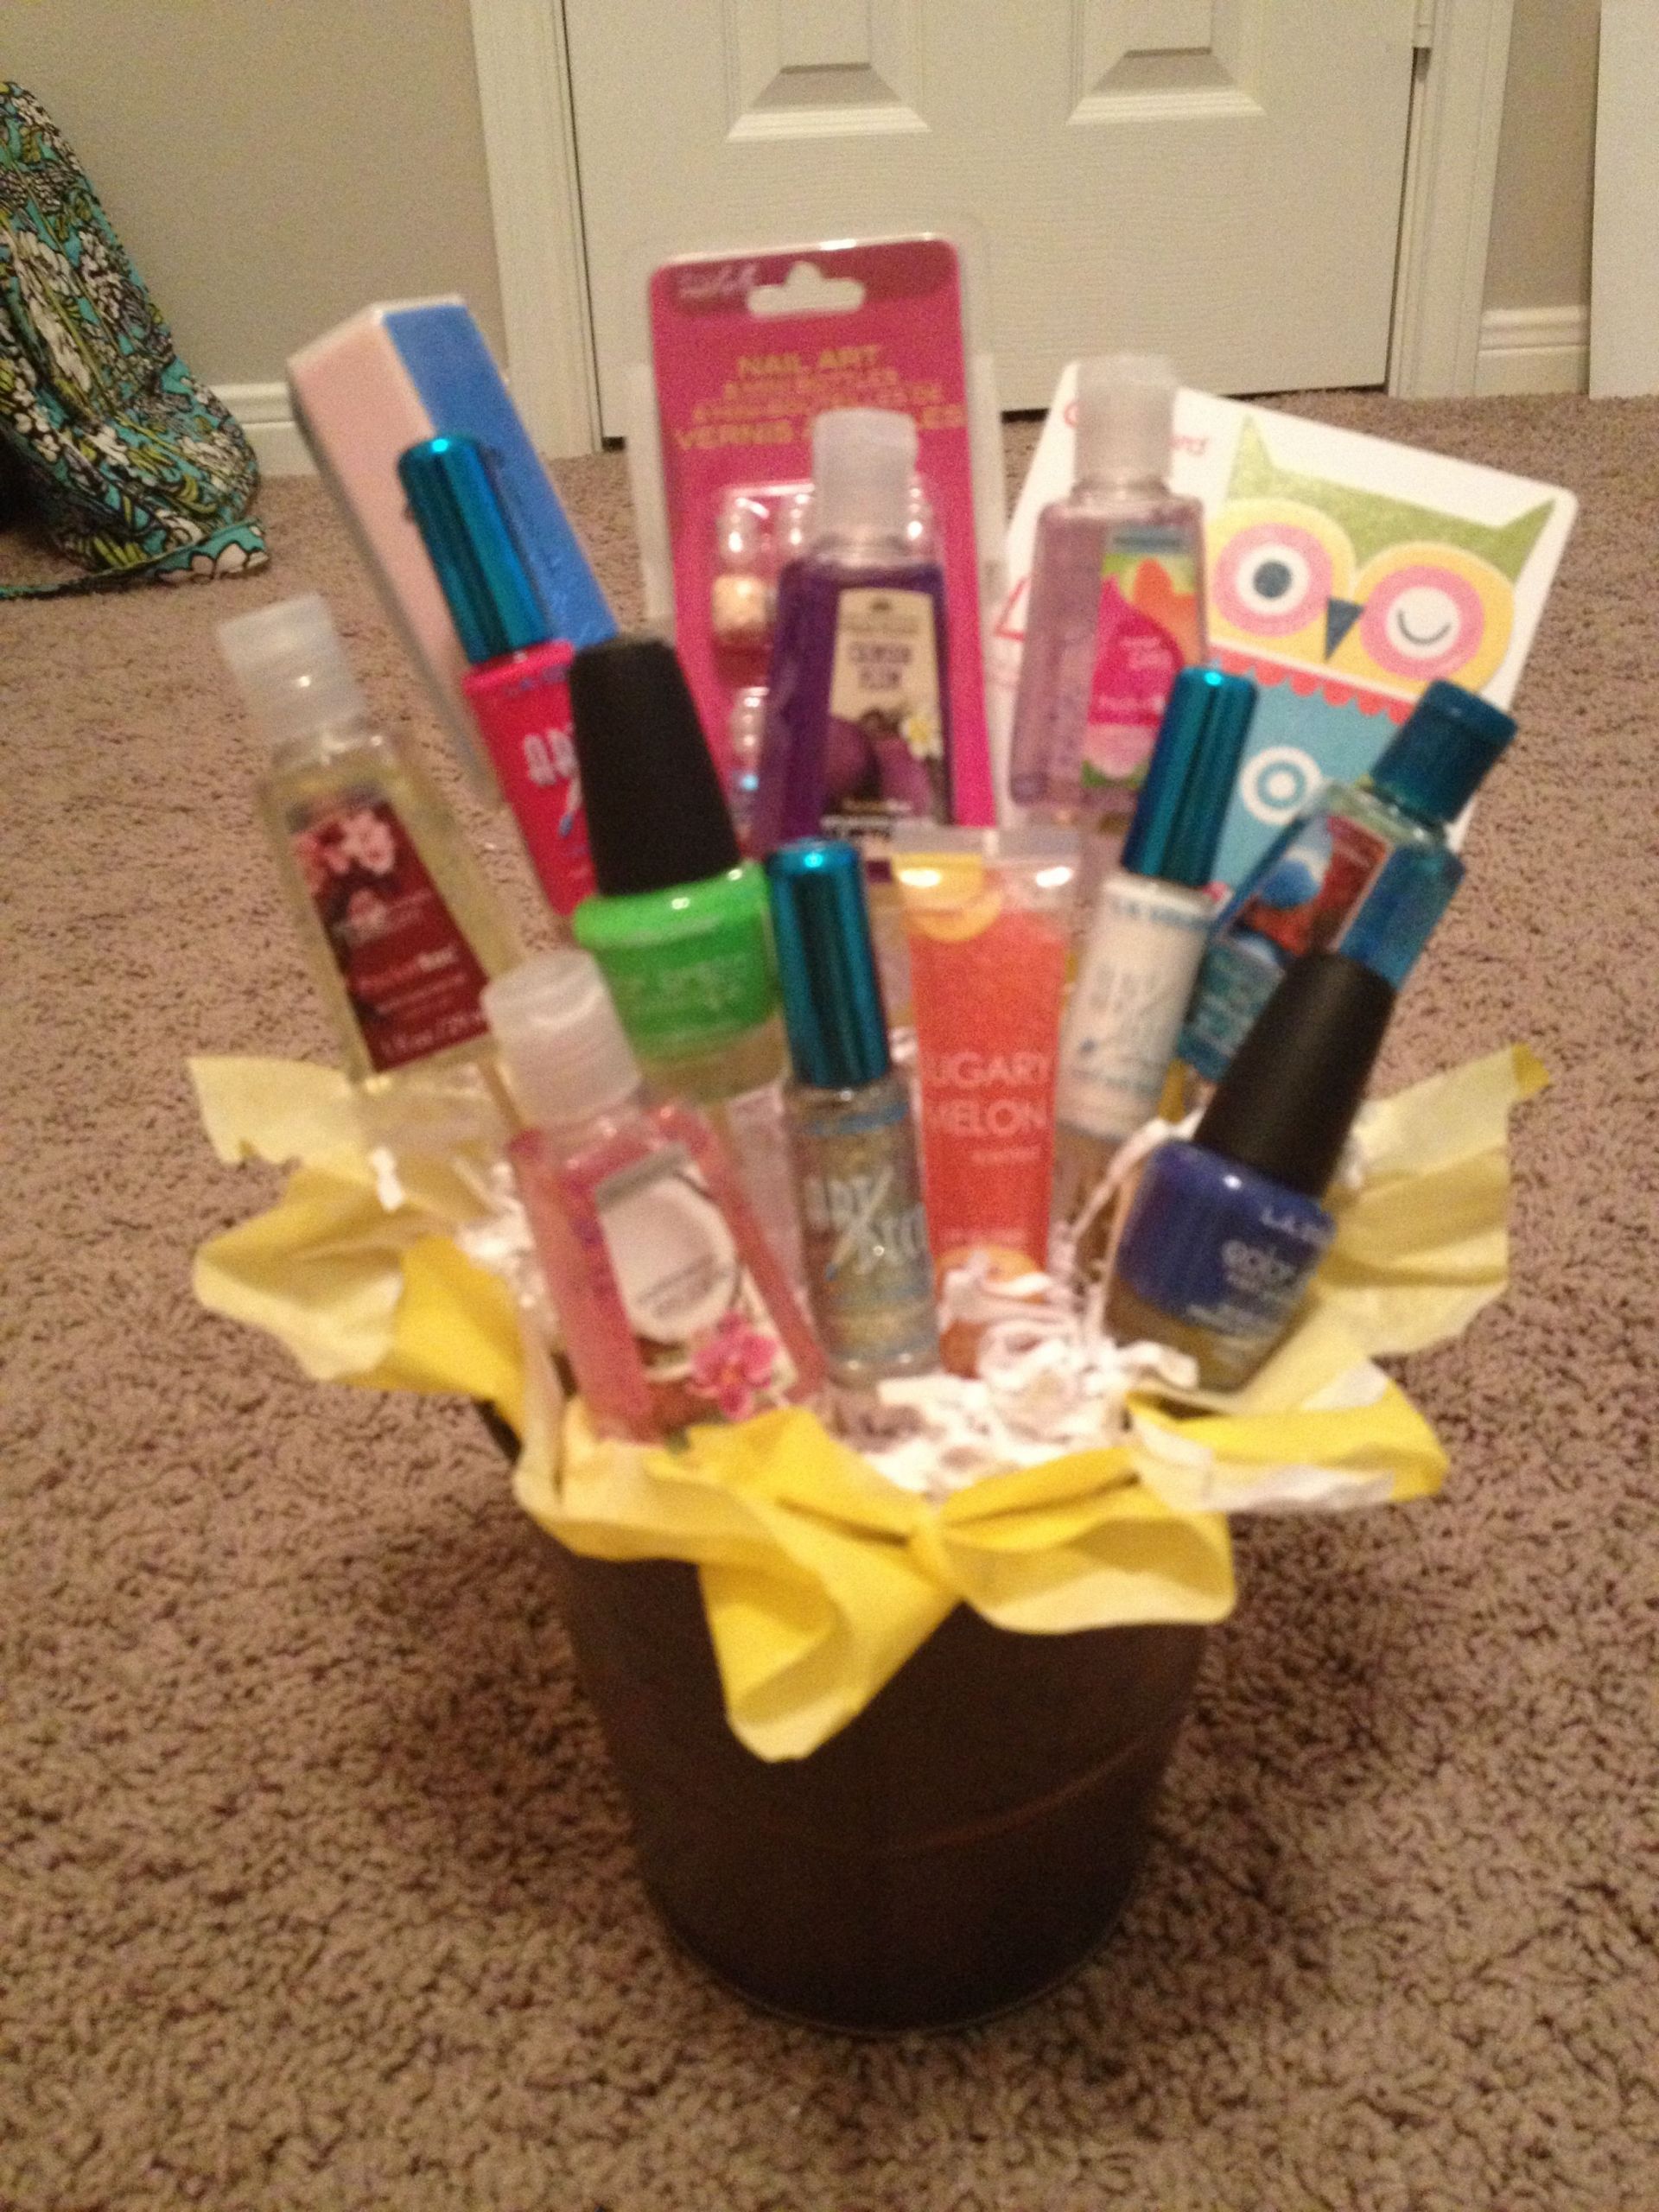 12 Year Girl Birthday Gift Ideas
 Birthday present I put to her for 13 year old girl This